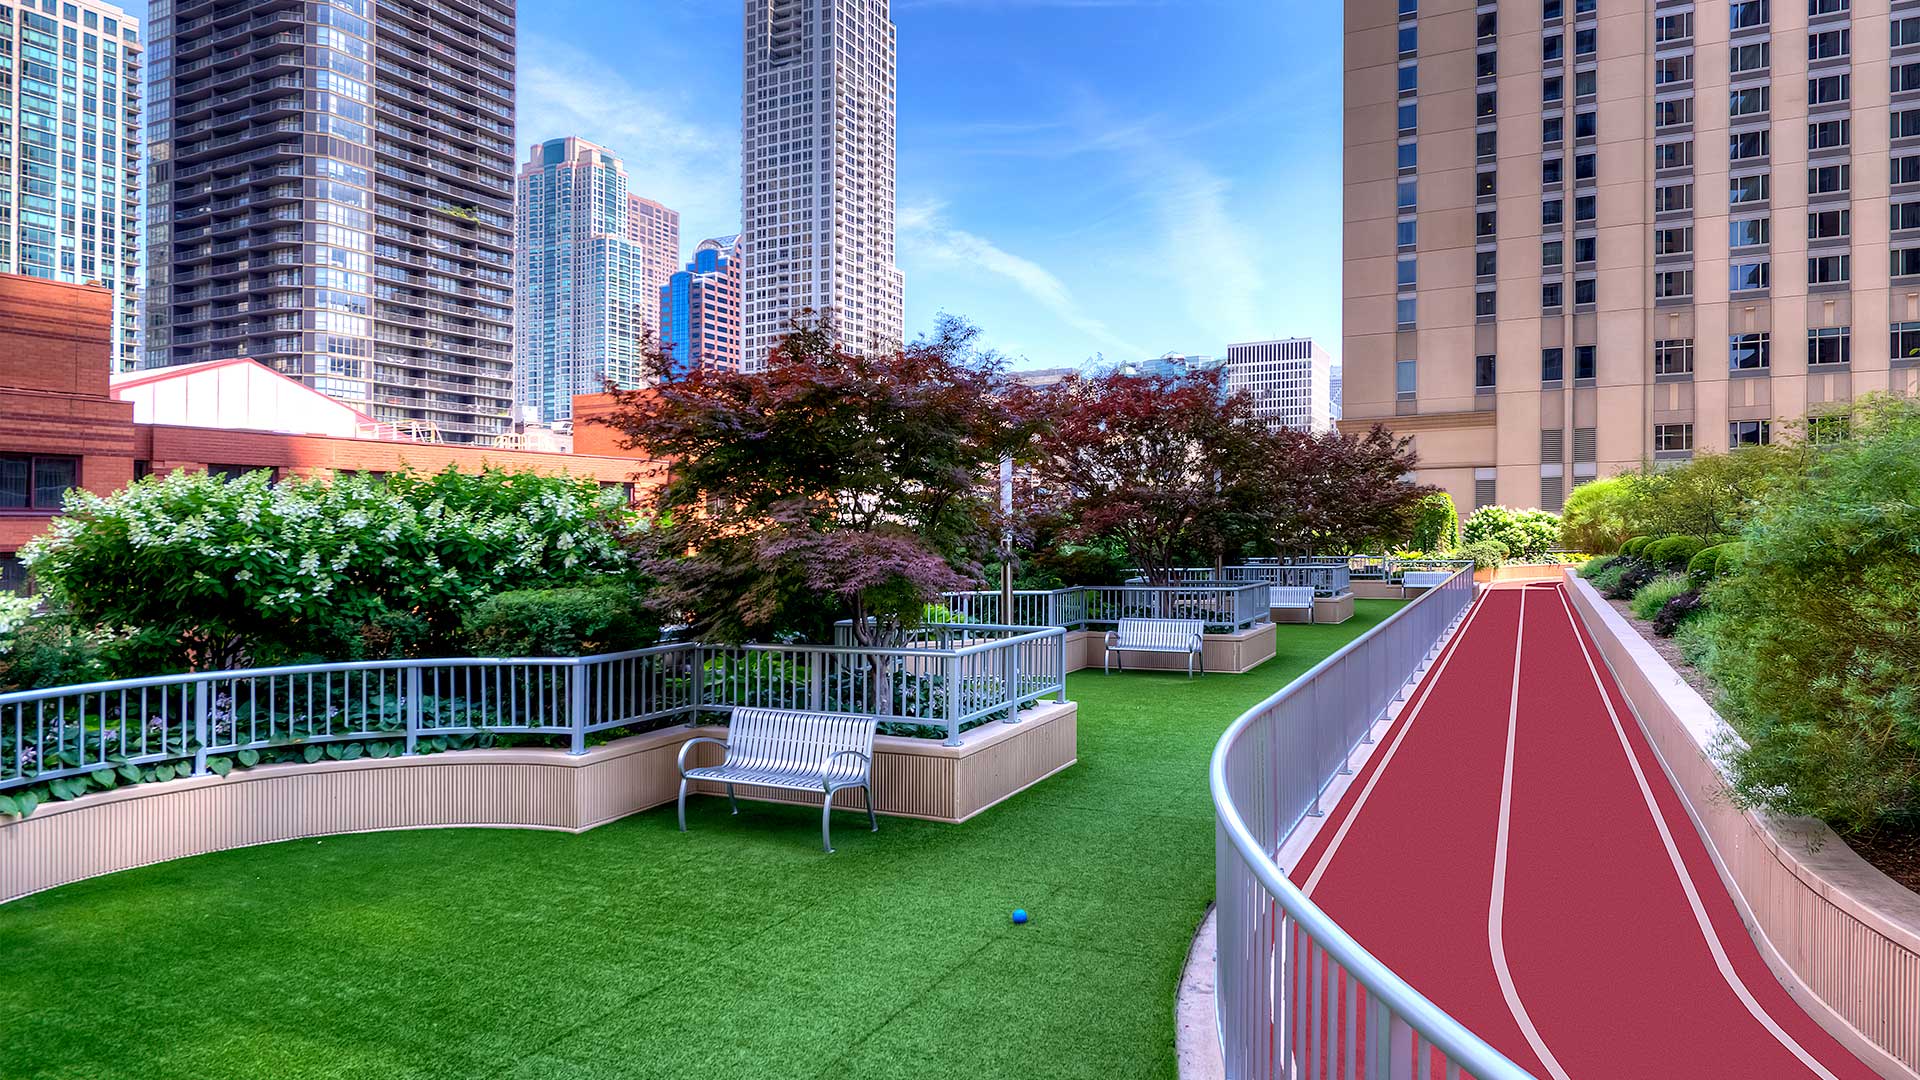 Looking down along the outdoor running track and dog park. The track runs along the right and the green turf of the dog park on the left. City buildings are seen in the background.